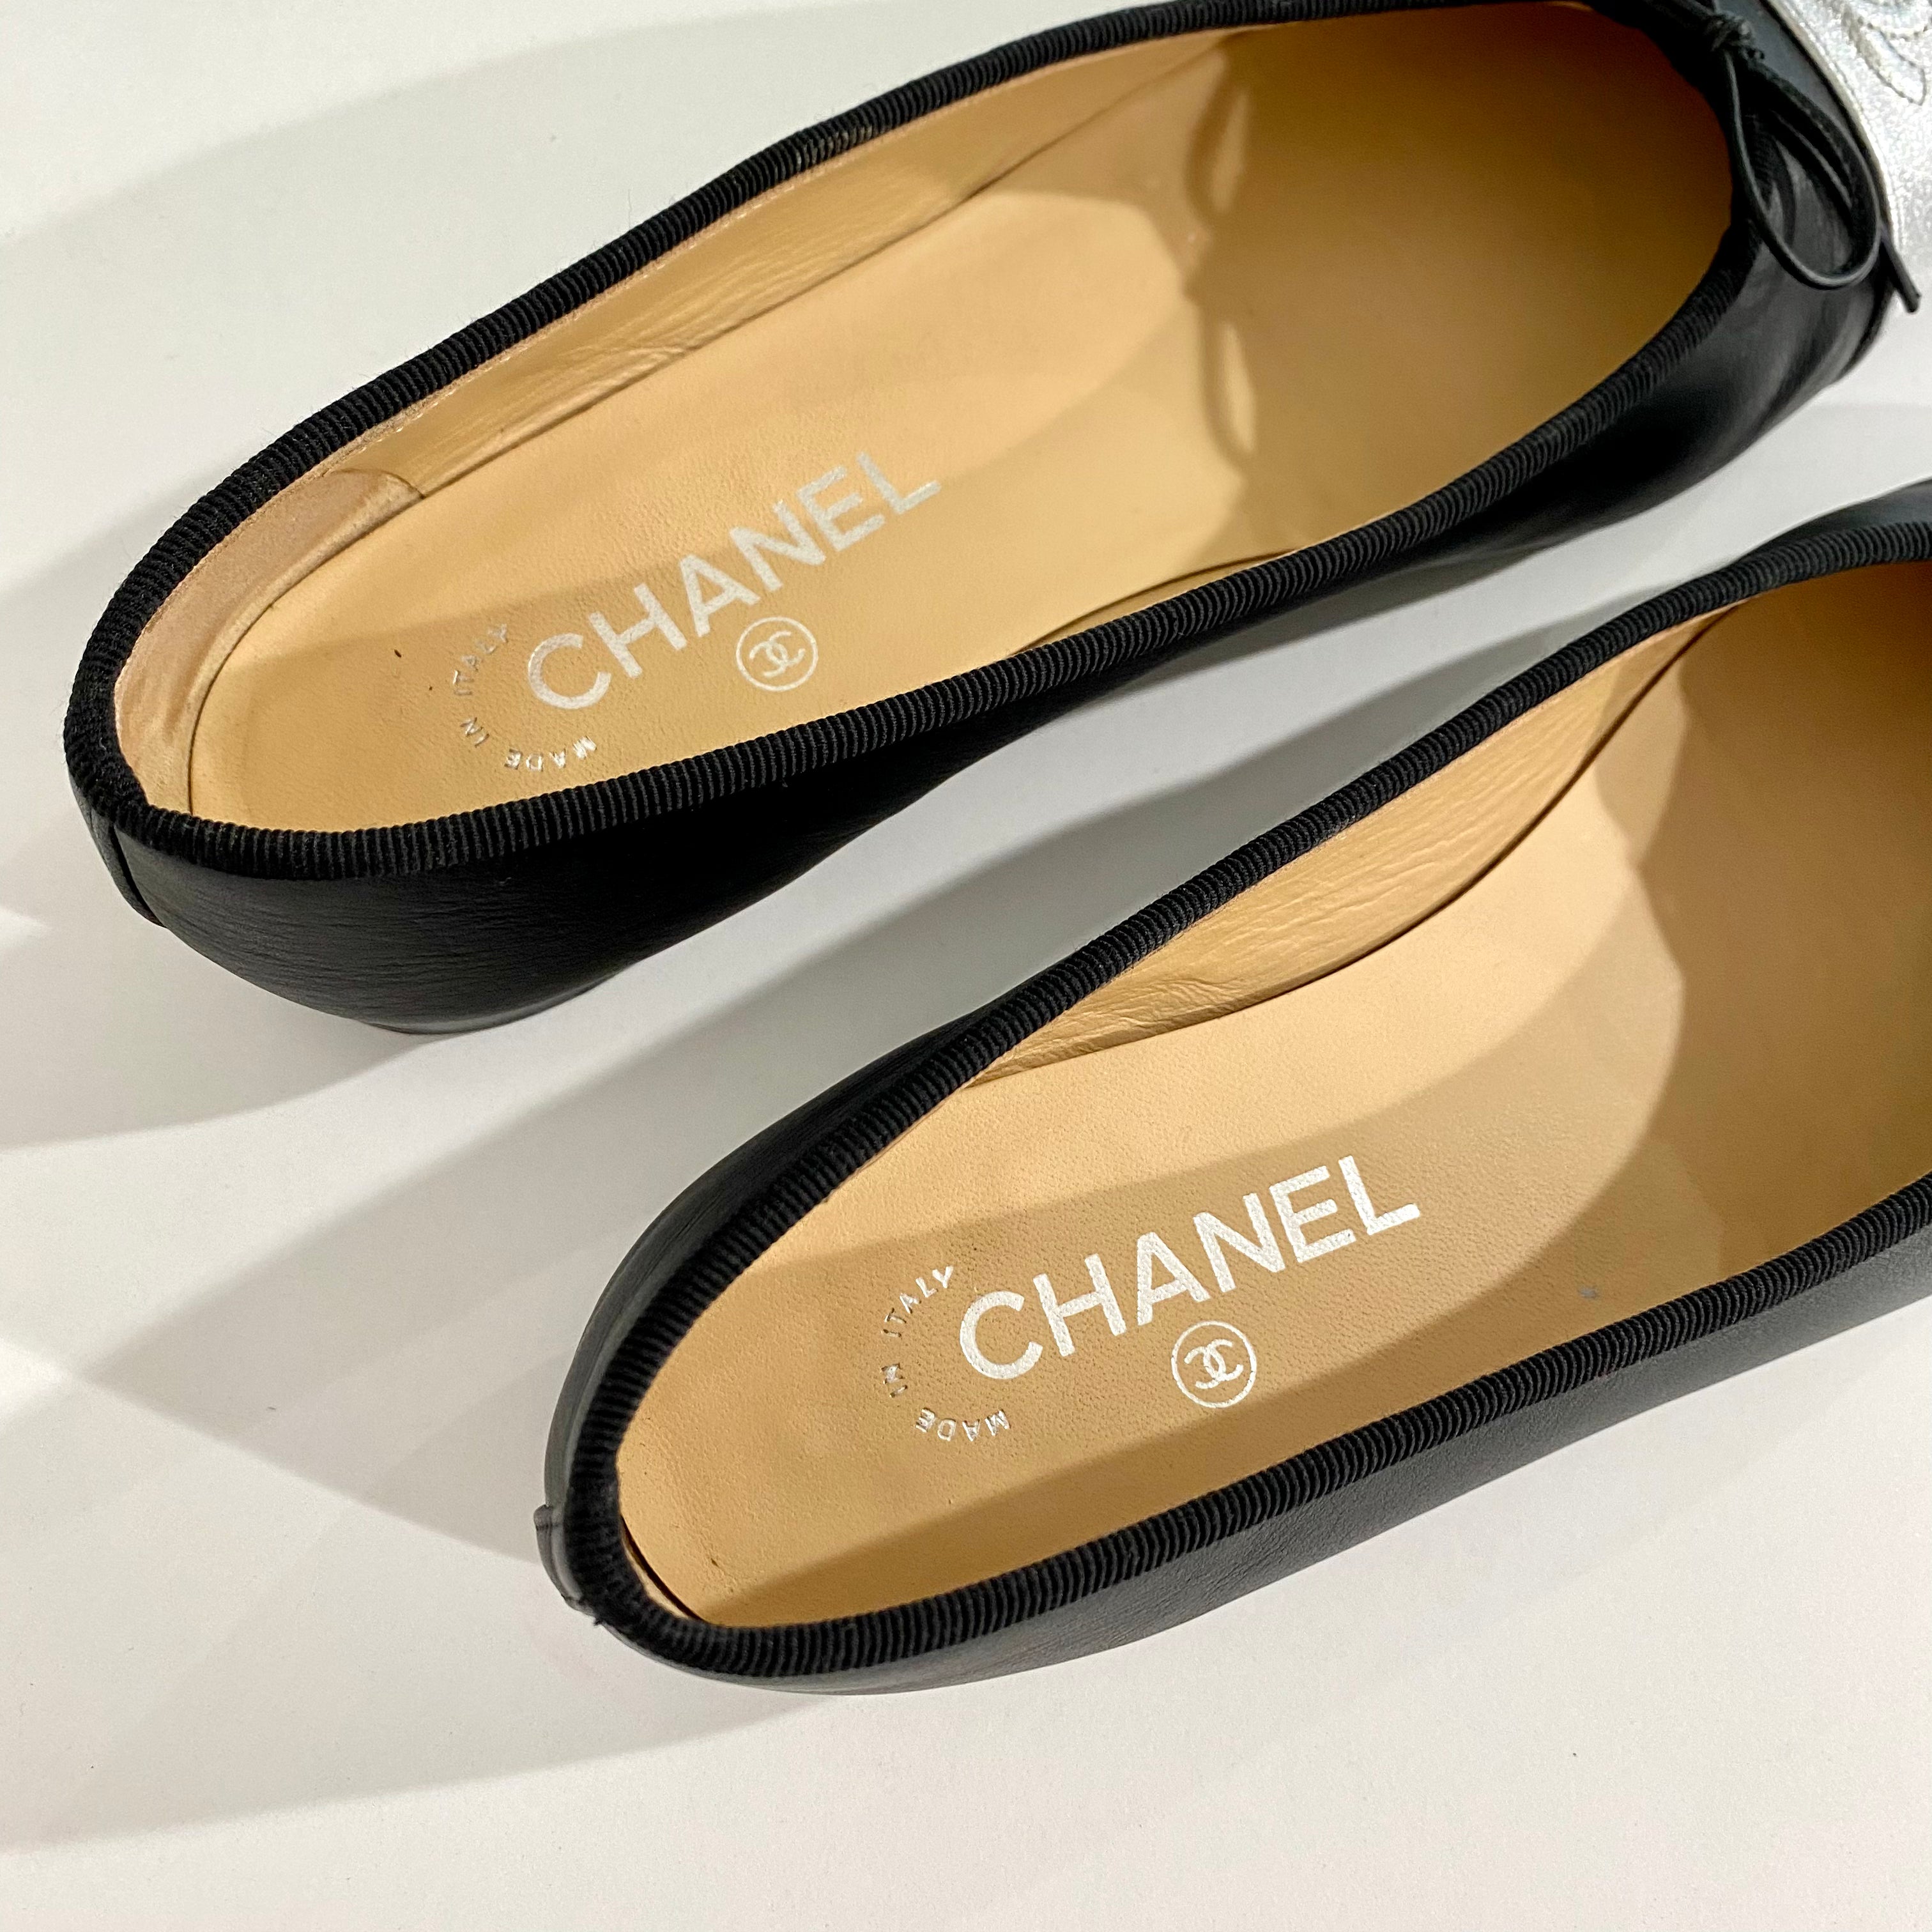 Lot 17 - Two pairs of Chanel two-tone leather ballet